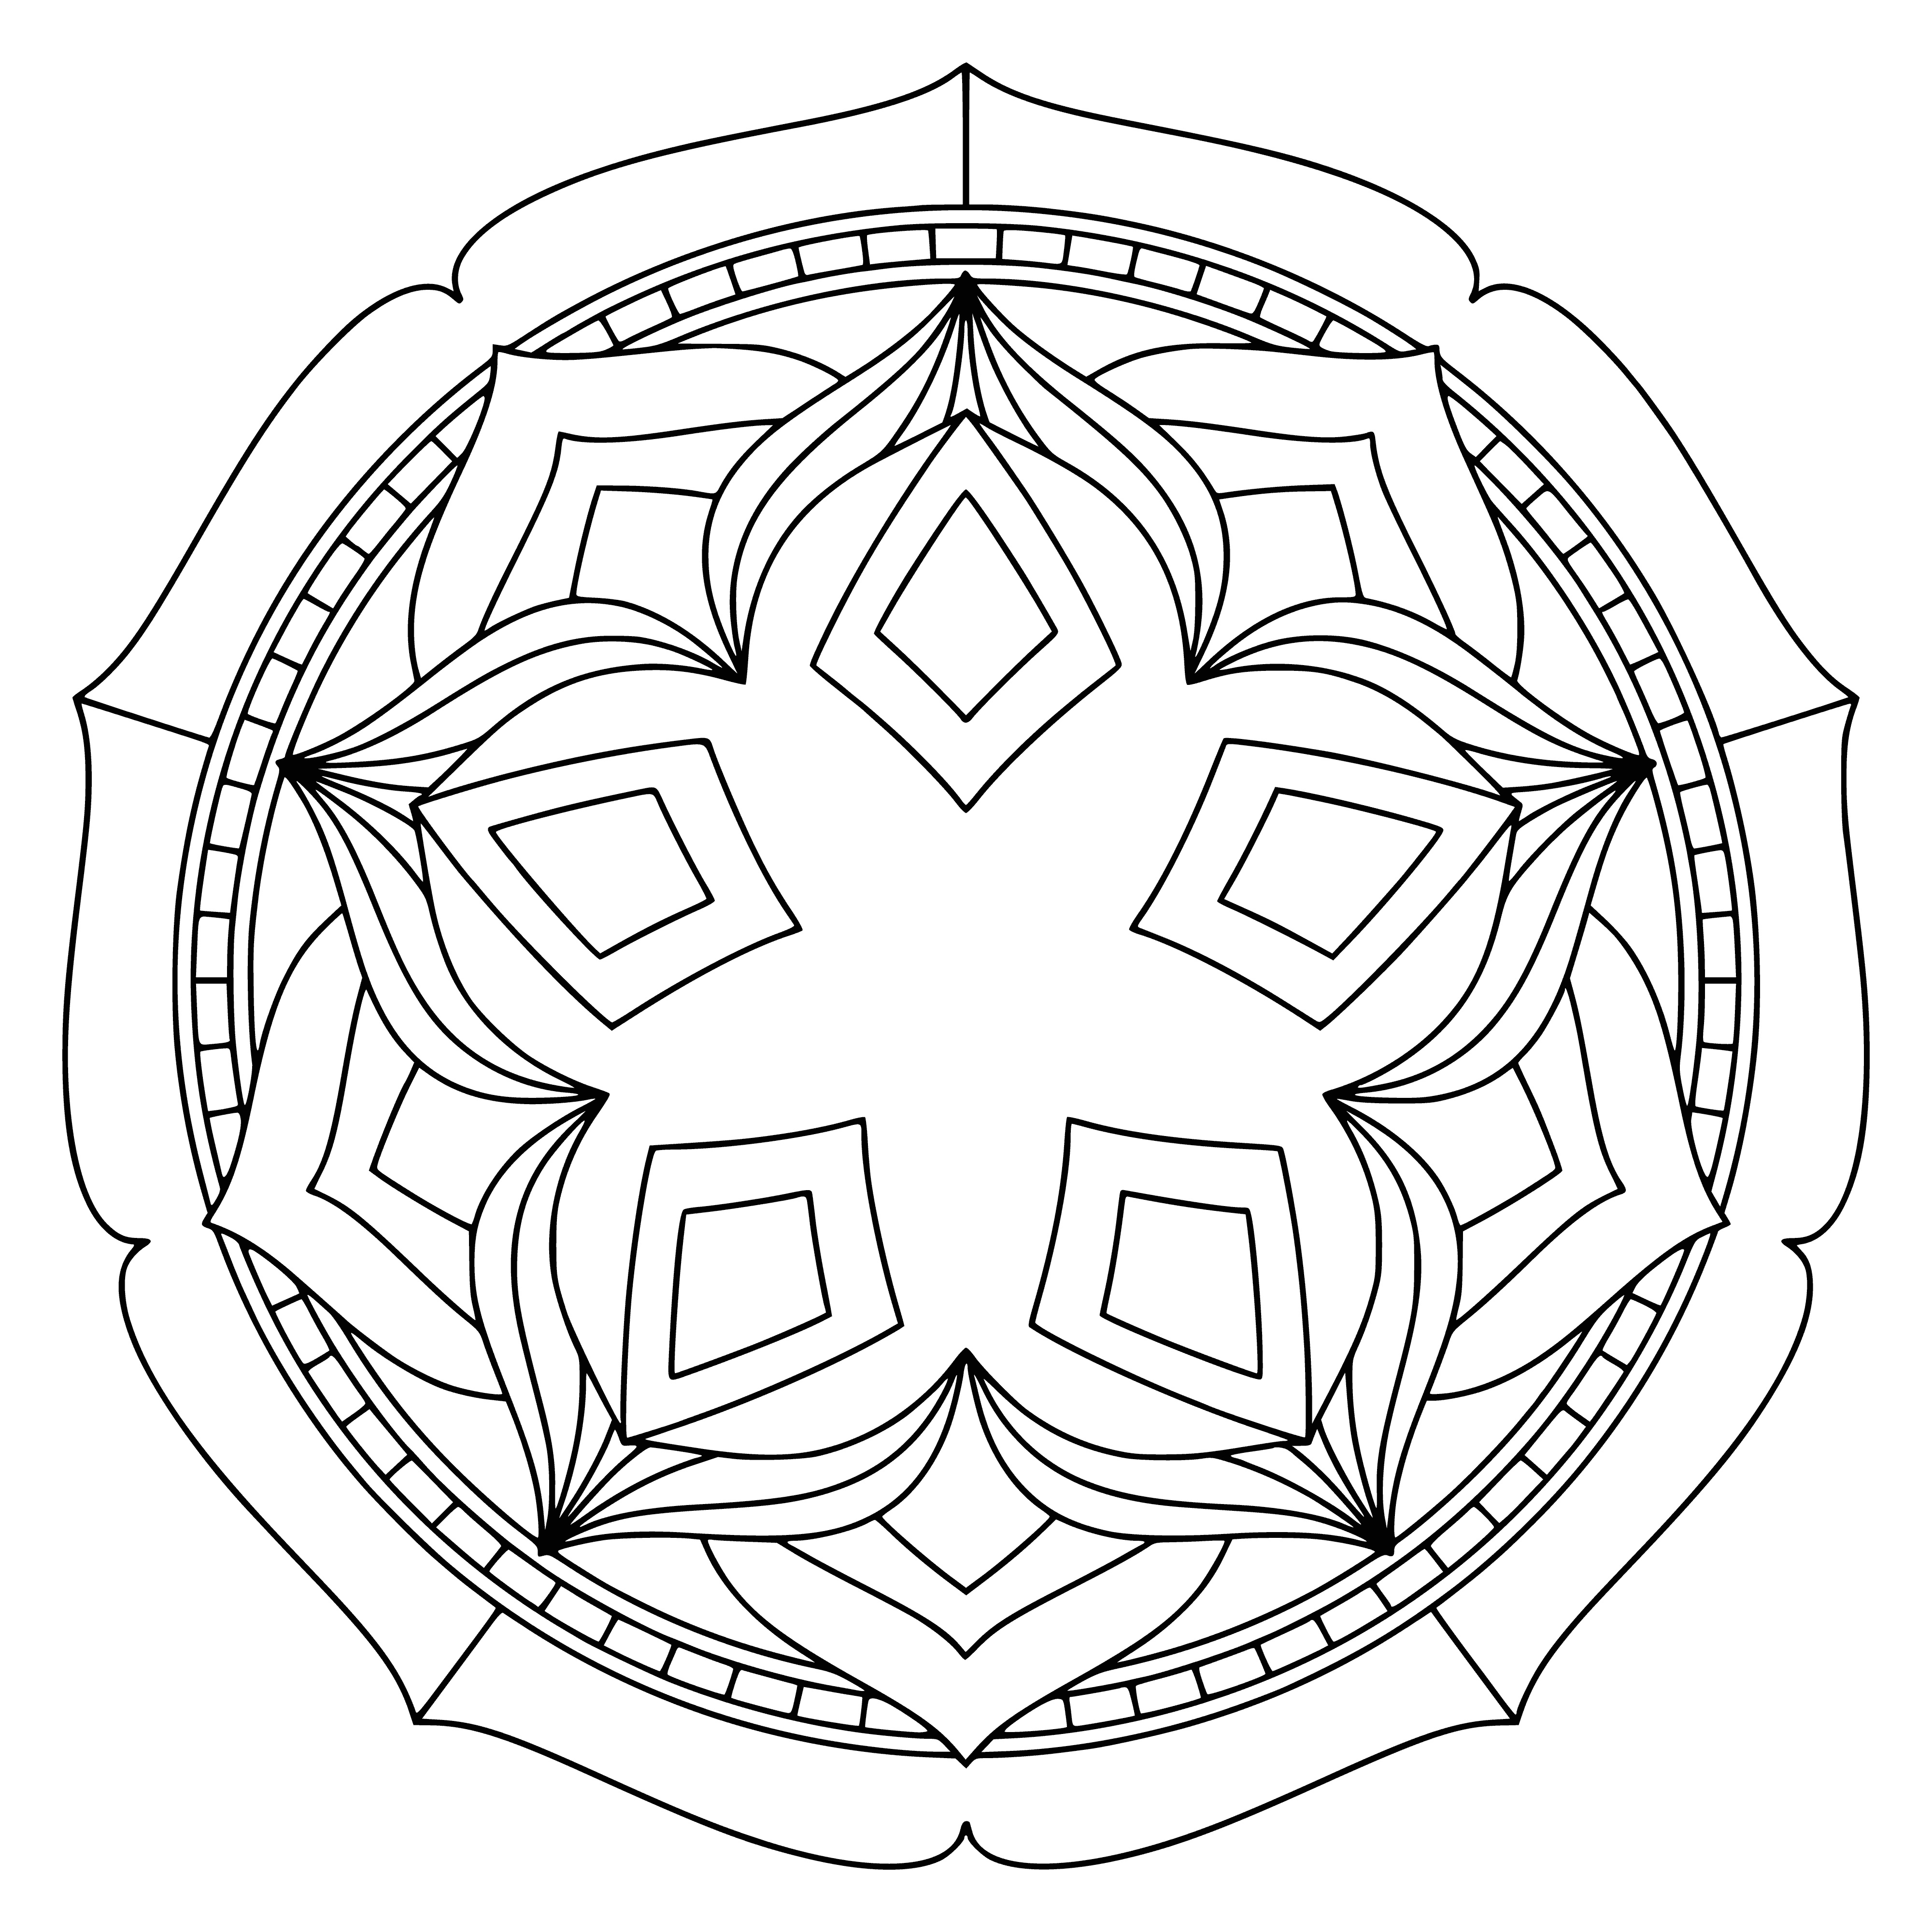 coloring page: #mandala #coloring #design

Mandalas have 4 quadrants w/ flowers, stars, clouds & suns plus easy designs around them. Perfect for relaxing & creative coloring! #mandala #coloring